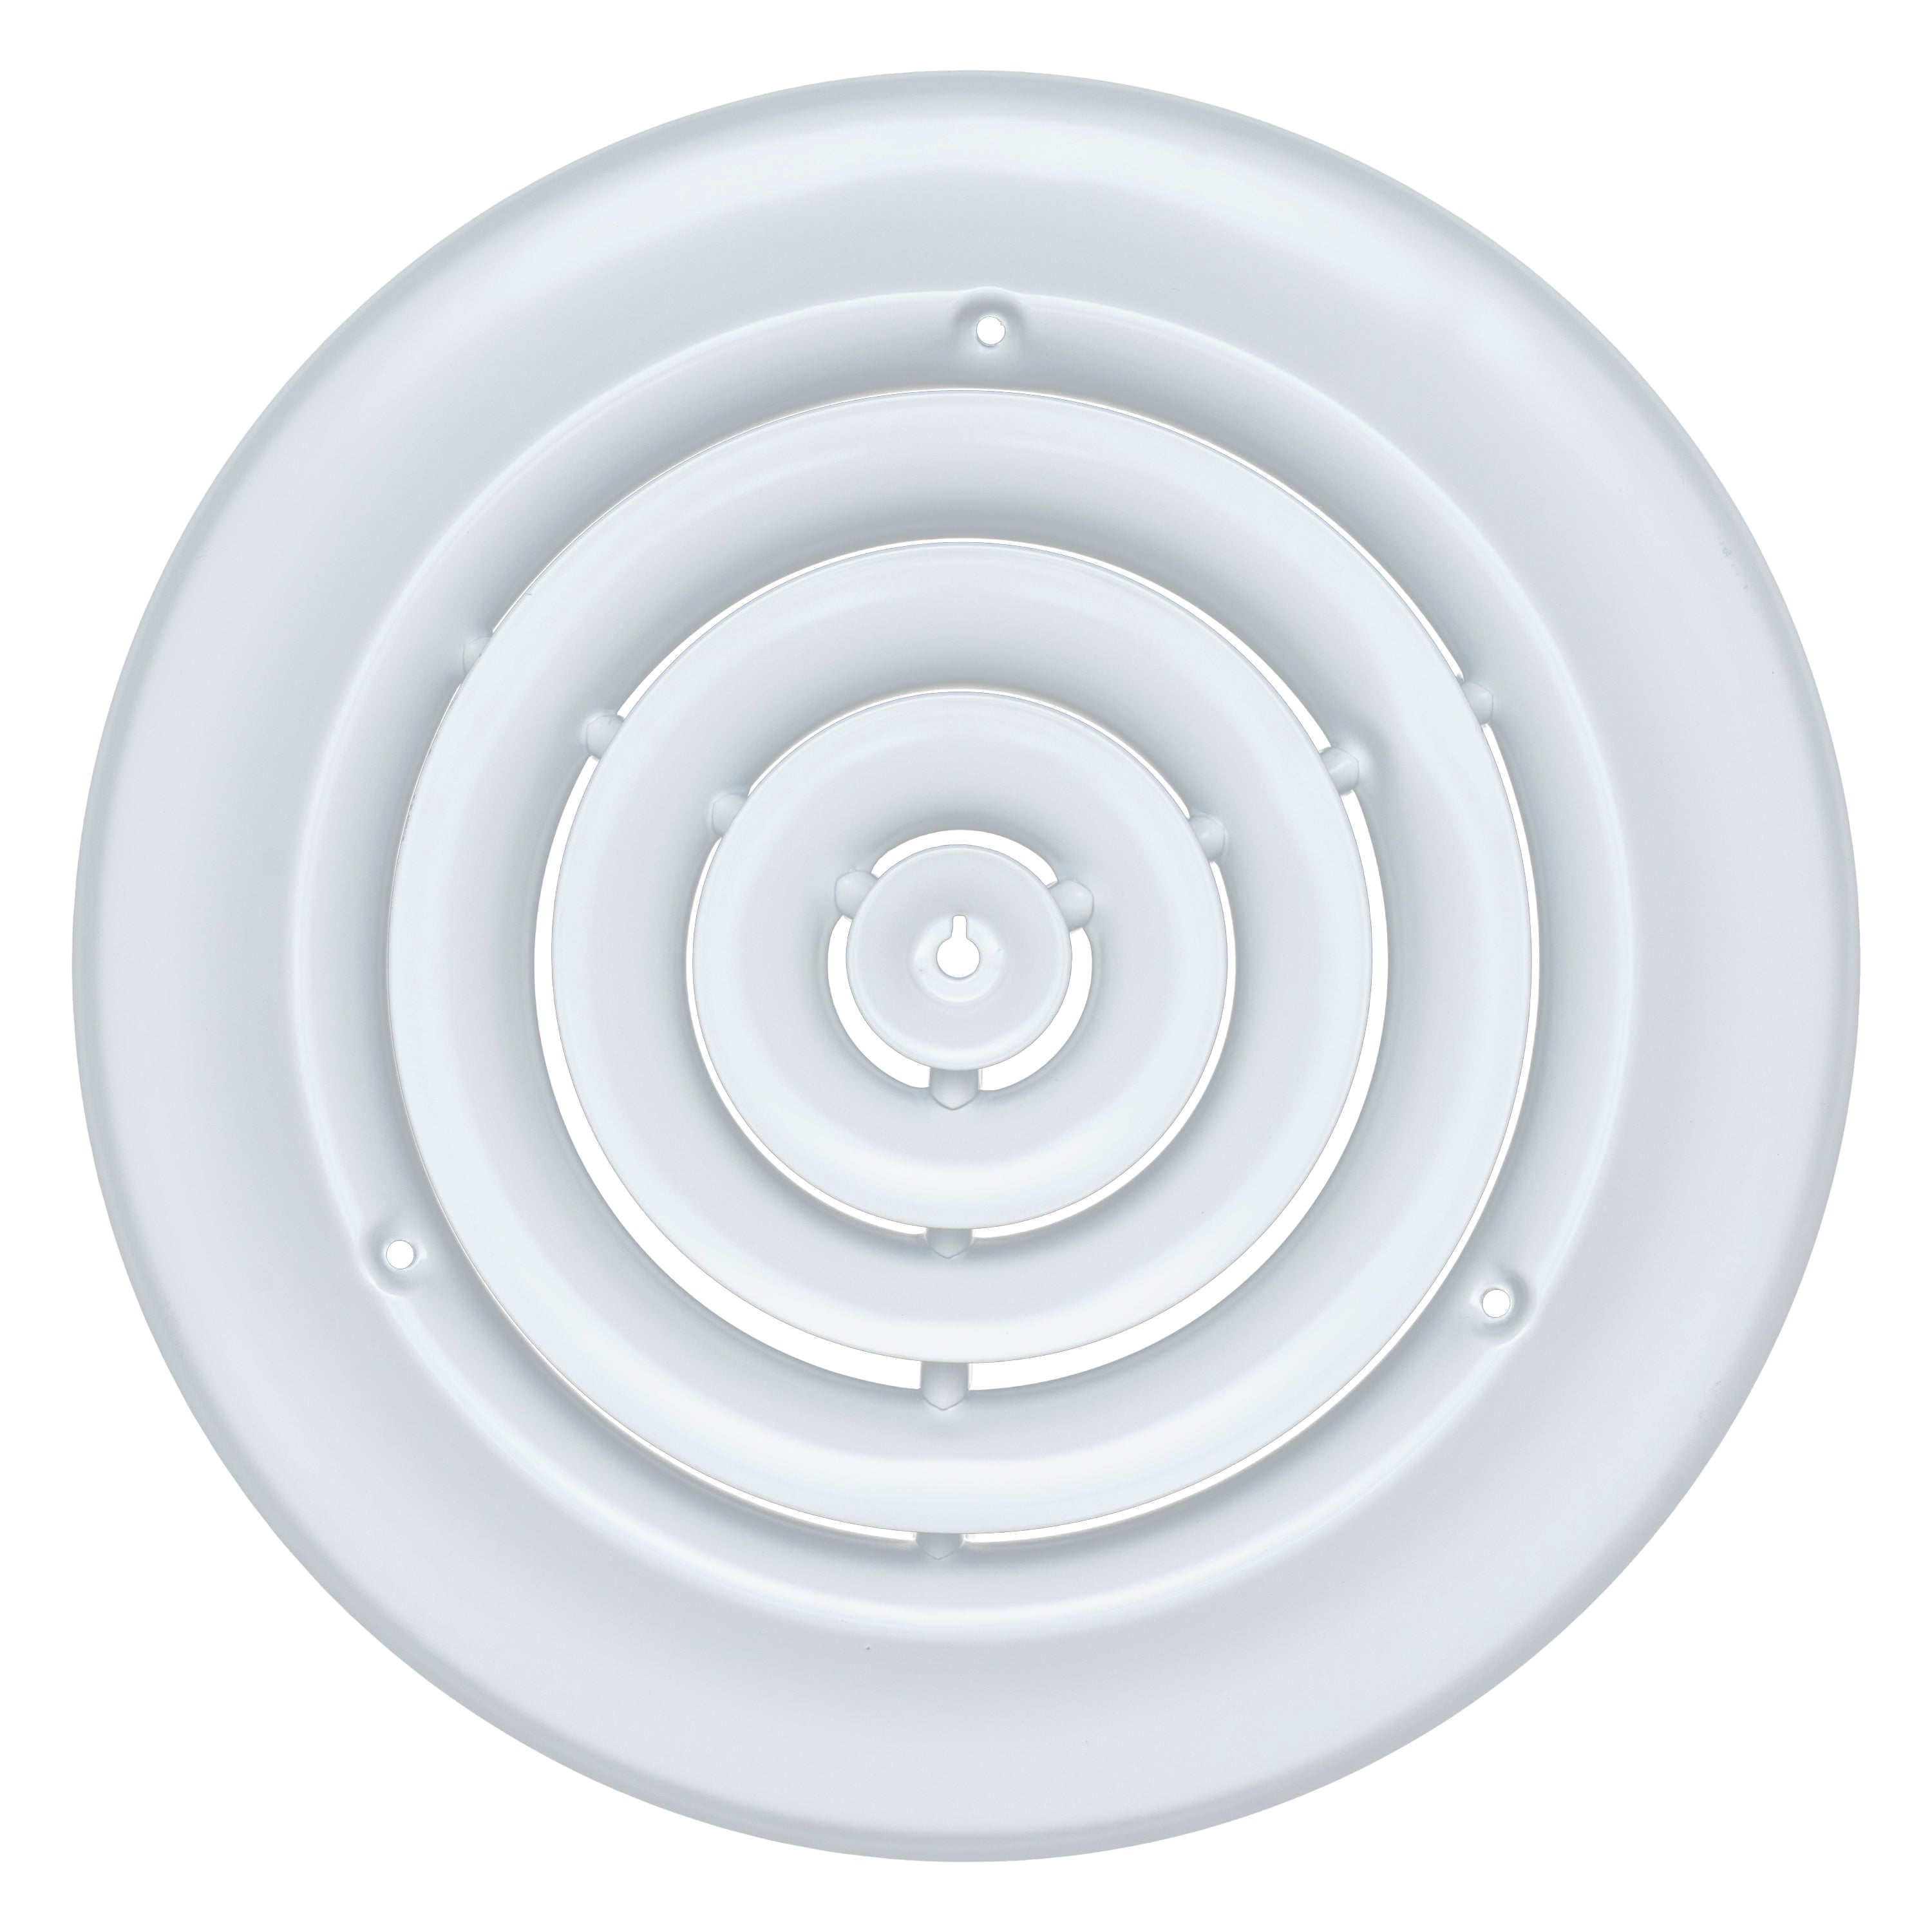 Handua 8" Steel Round Air Supply Diffuser for Ceiling - White - Outer Dimension: 11-15/16"